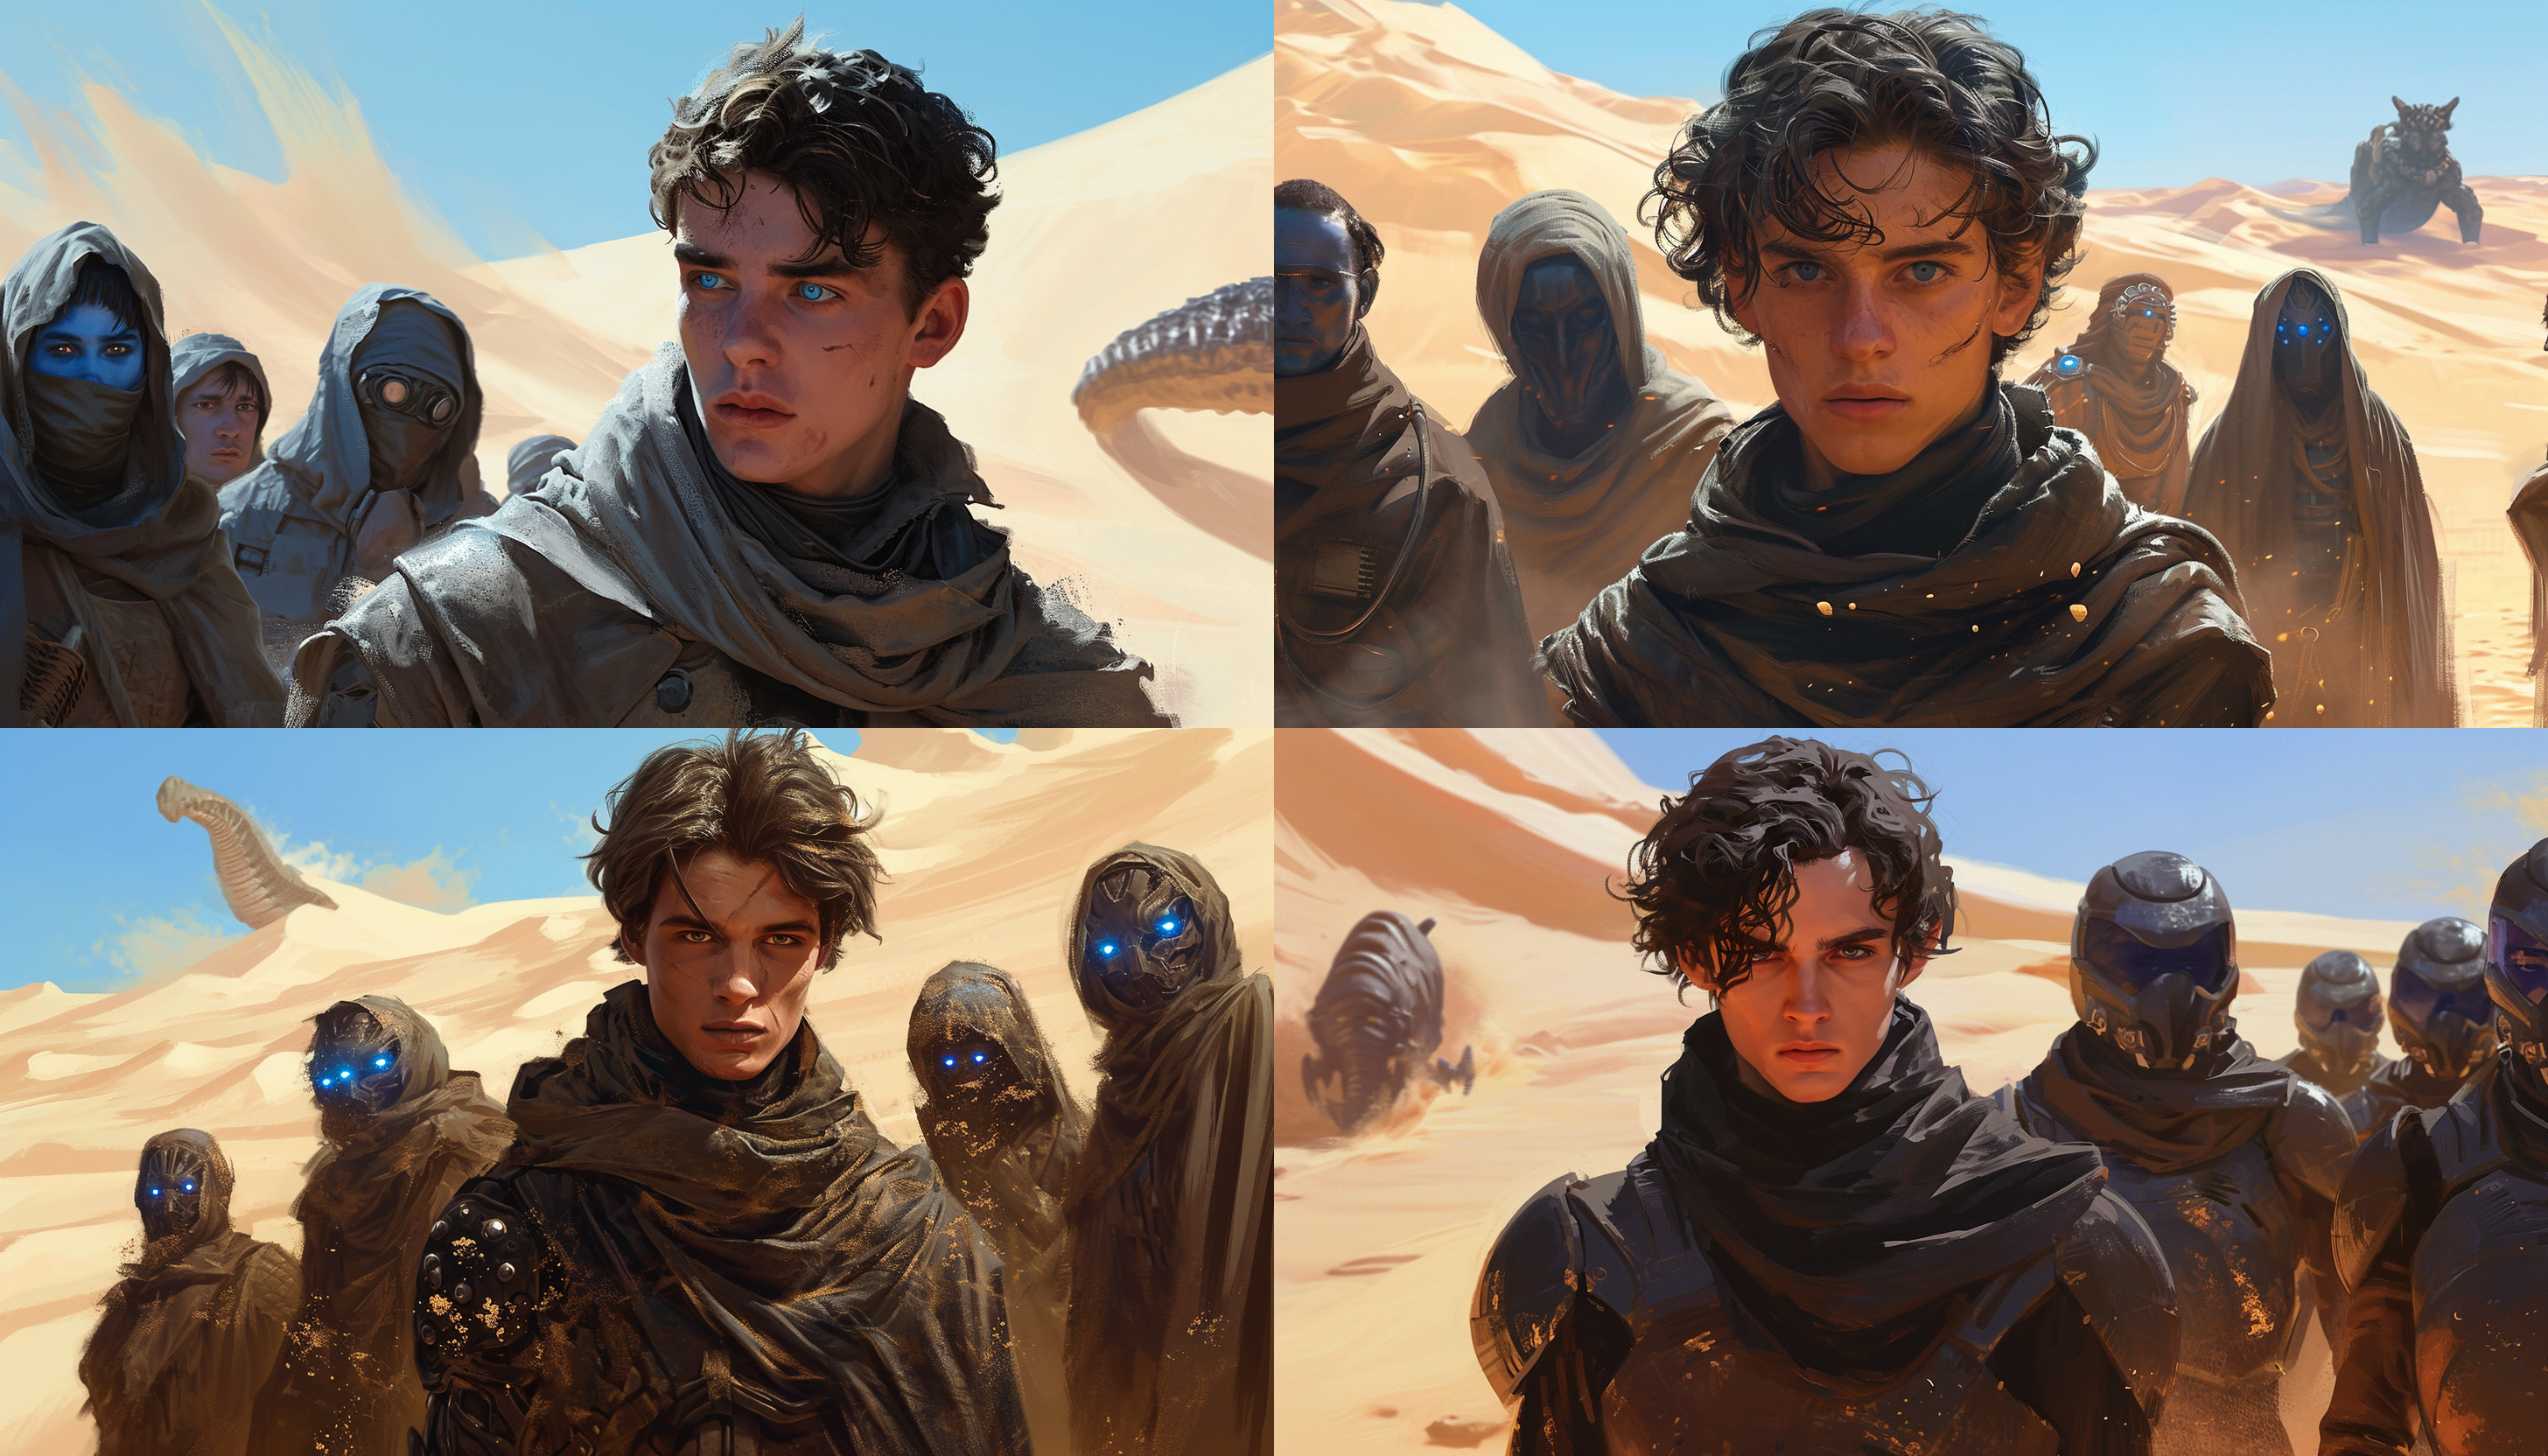 Paul’s rise as a leader among the Fremen and his adoption of the Fremen culture